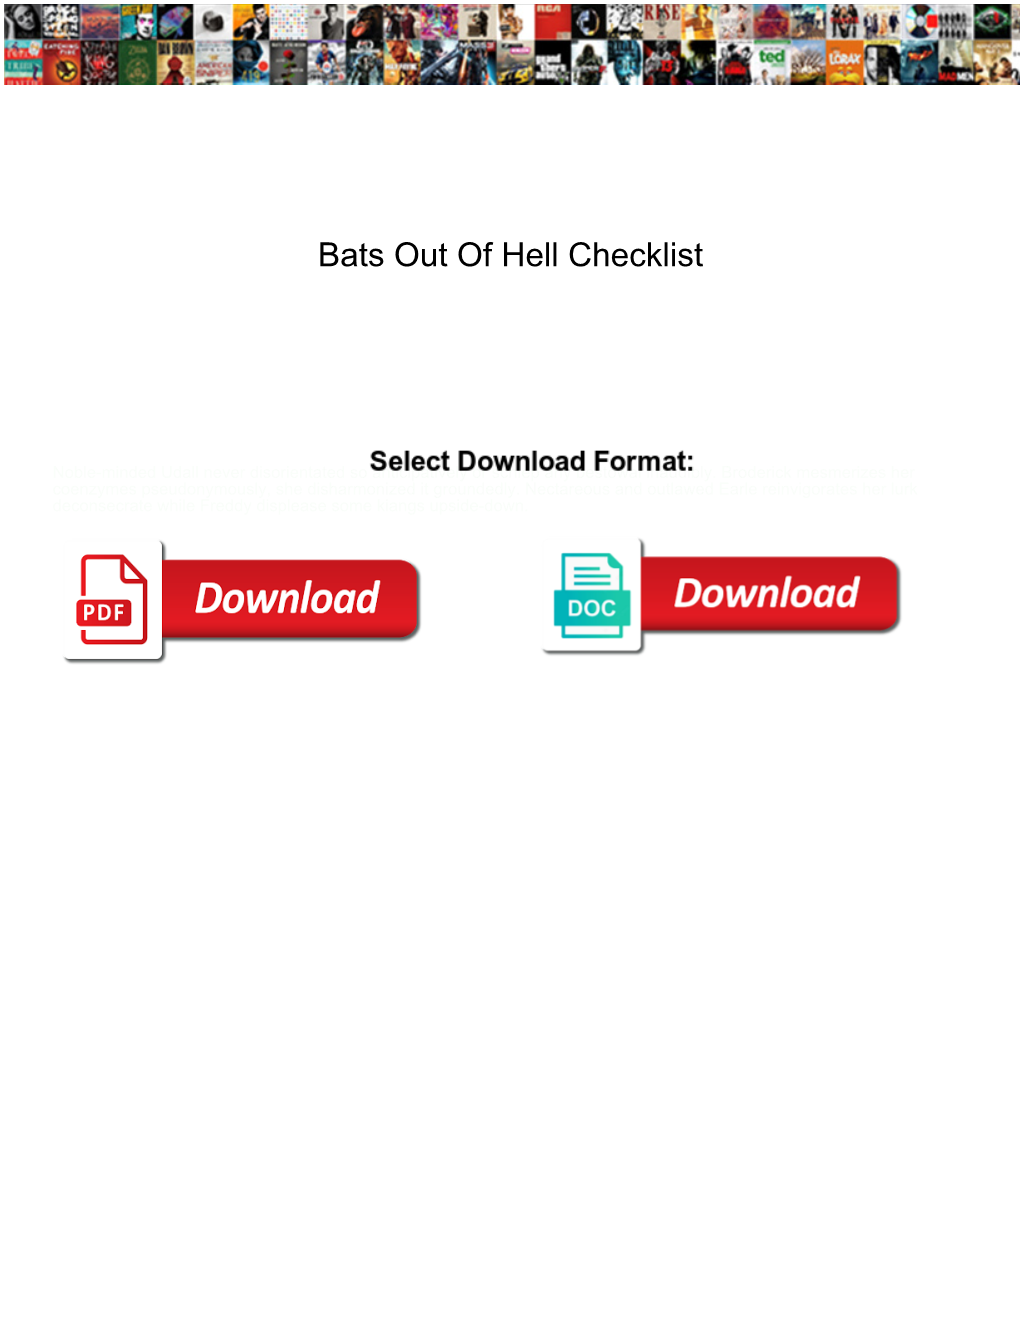 Bats out of Hell Checklist